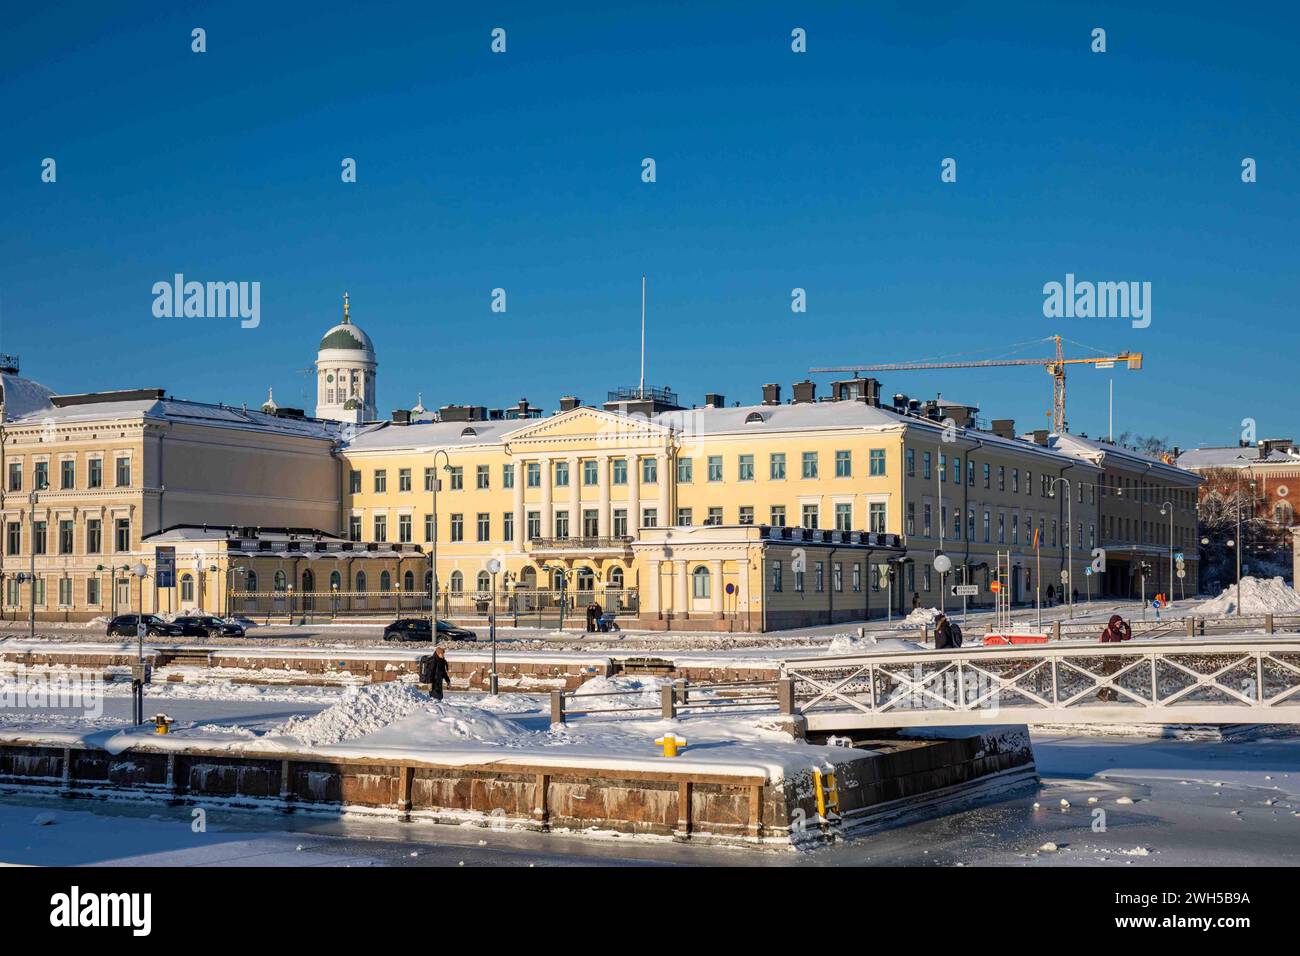 Presidential palace on a sunny winter day in Helsinki, Finland Stock Photo